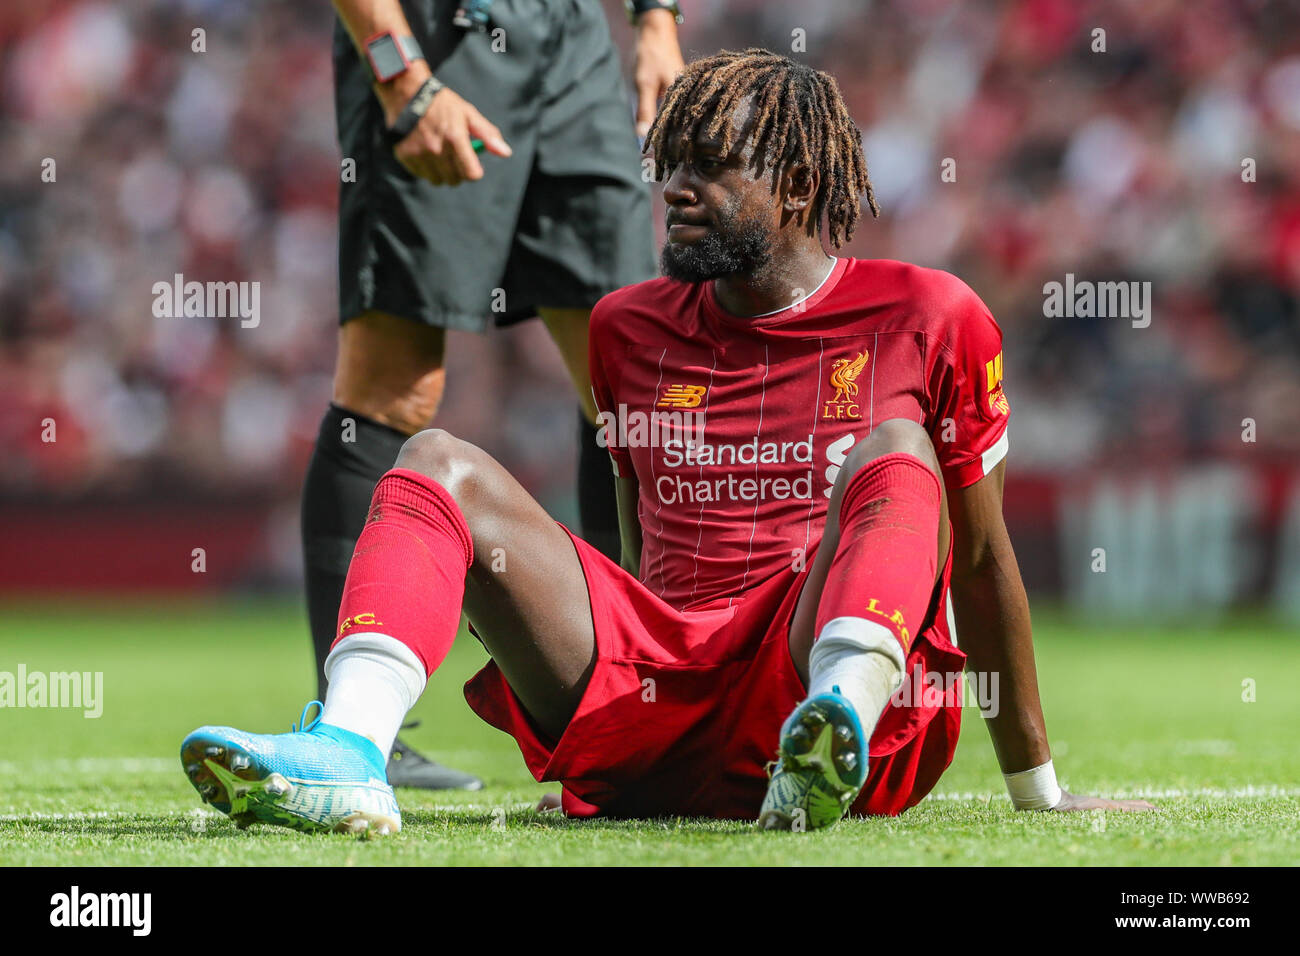 Liverpool, UK. 14th Sep, 2019. Premier League Football, Liverpool vs Newcastle United ; Divock Origi (27) of Liverpool grits his teeth as he sits injured on the floor Credit: Mark Cosgrove/News Images Premier League/EFL Football images are subject to DataCo Licence Credit: News Images /Alamy Live News Stock Photo